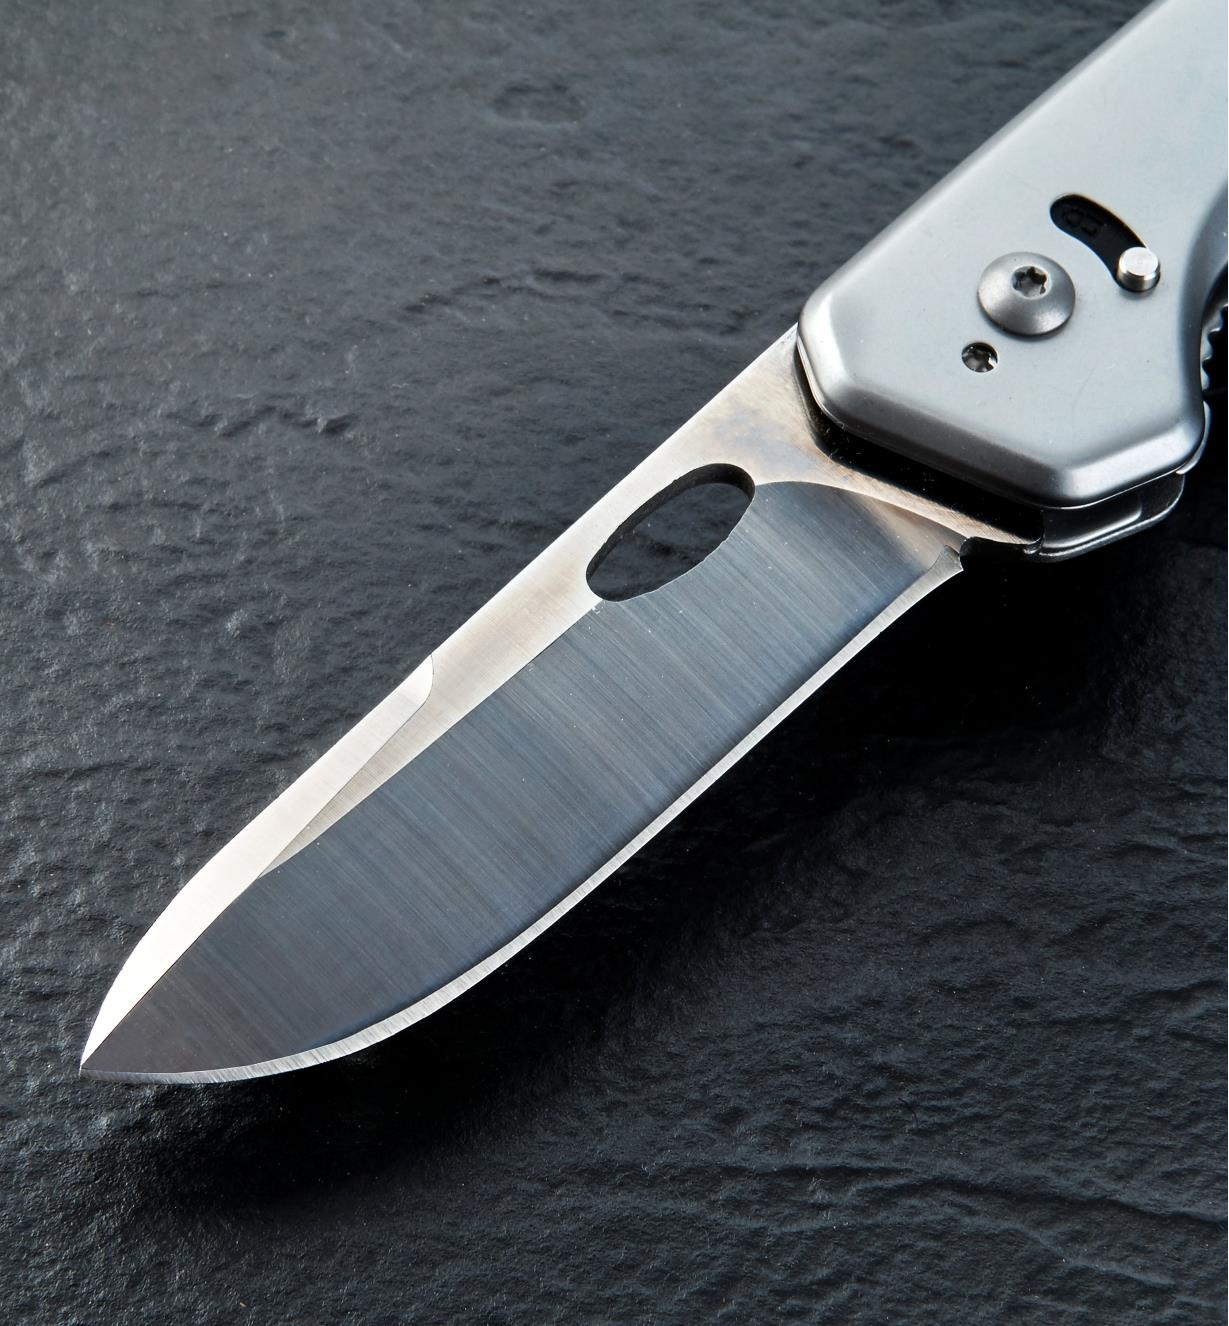 A close view of the included drop-point blade mounted on the 3-in-1 knife